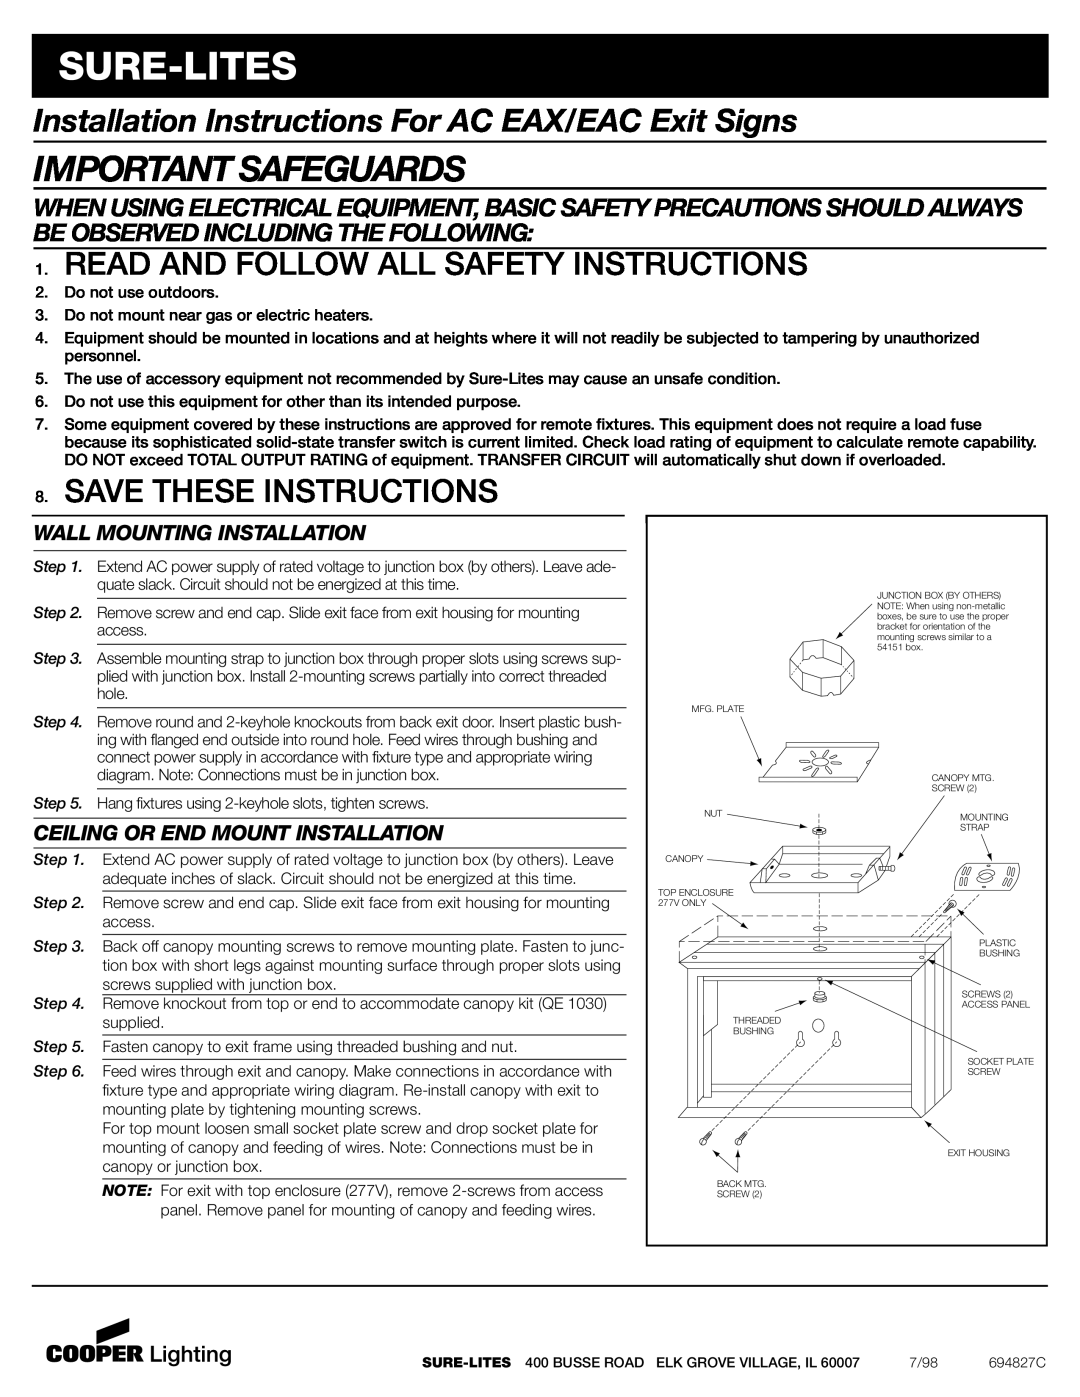 Cooper Lighting EAC Exit Series installation instructions Sure-Lites, Important Safeguards, Save These Instructions 